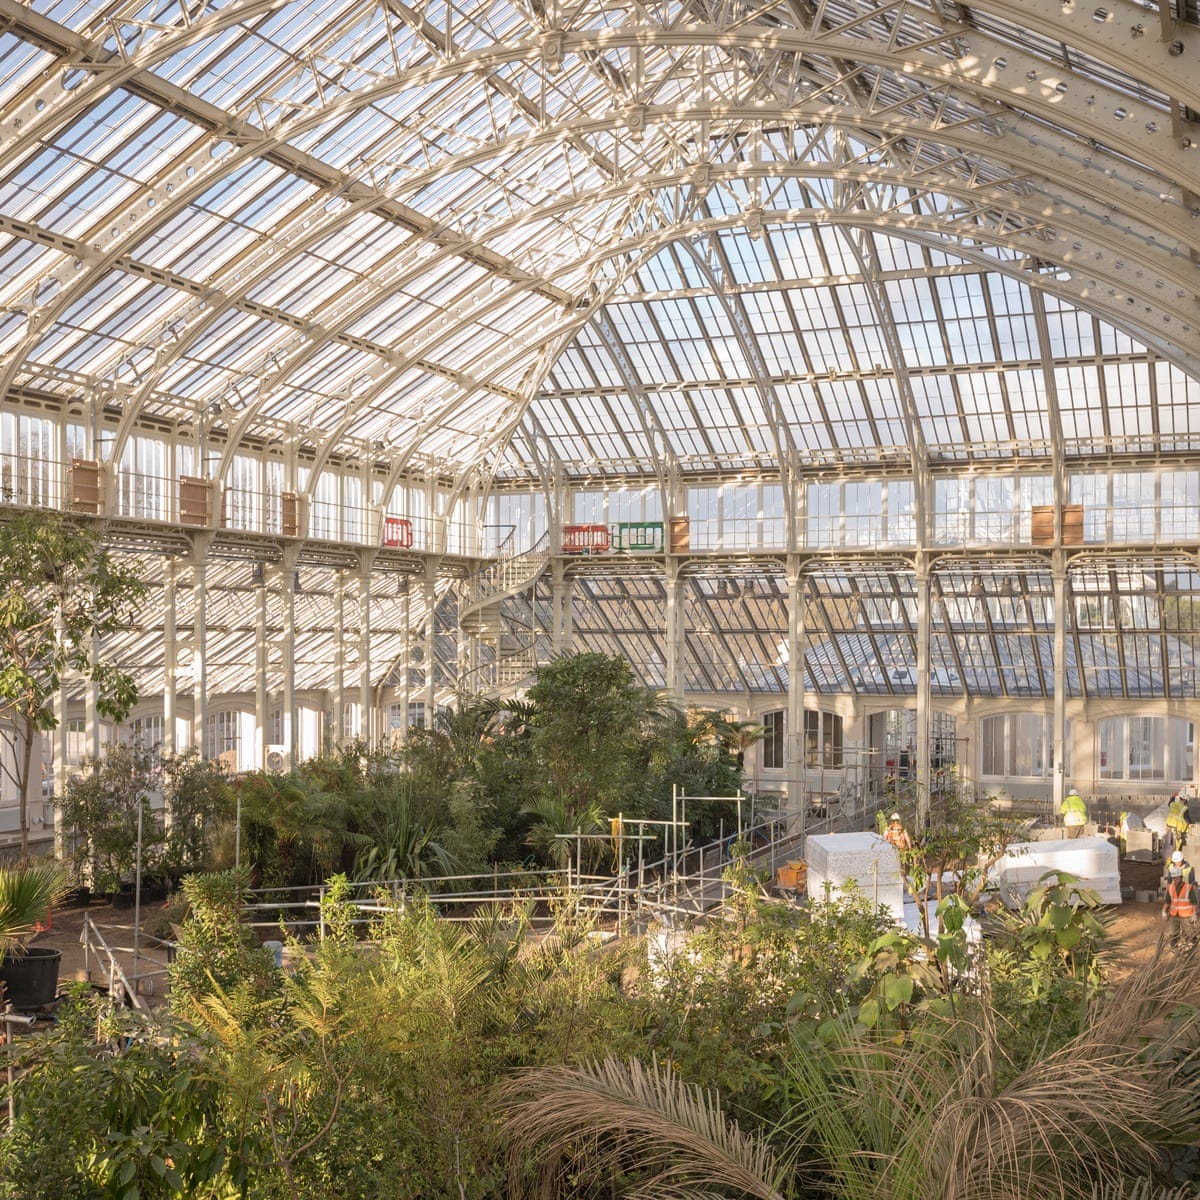 Kew Gardens' Temperate House to reopen after £41m restoration | Kew Gardens  | The Guardian